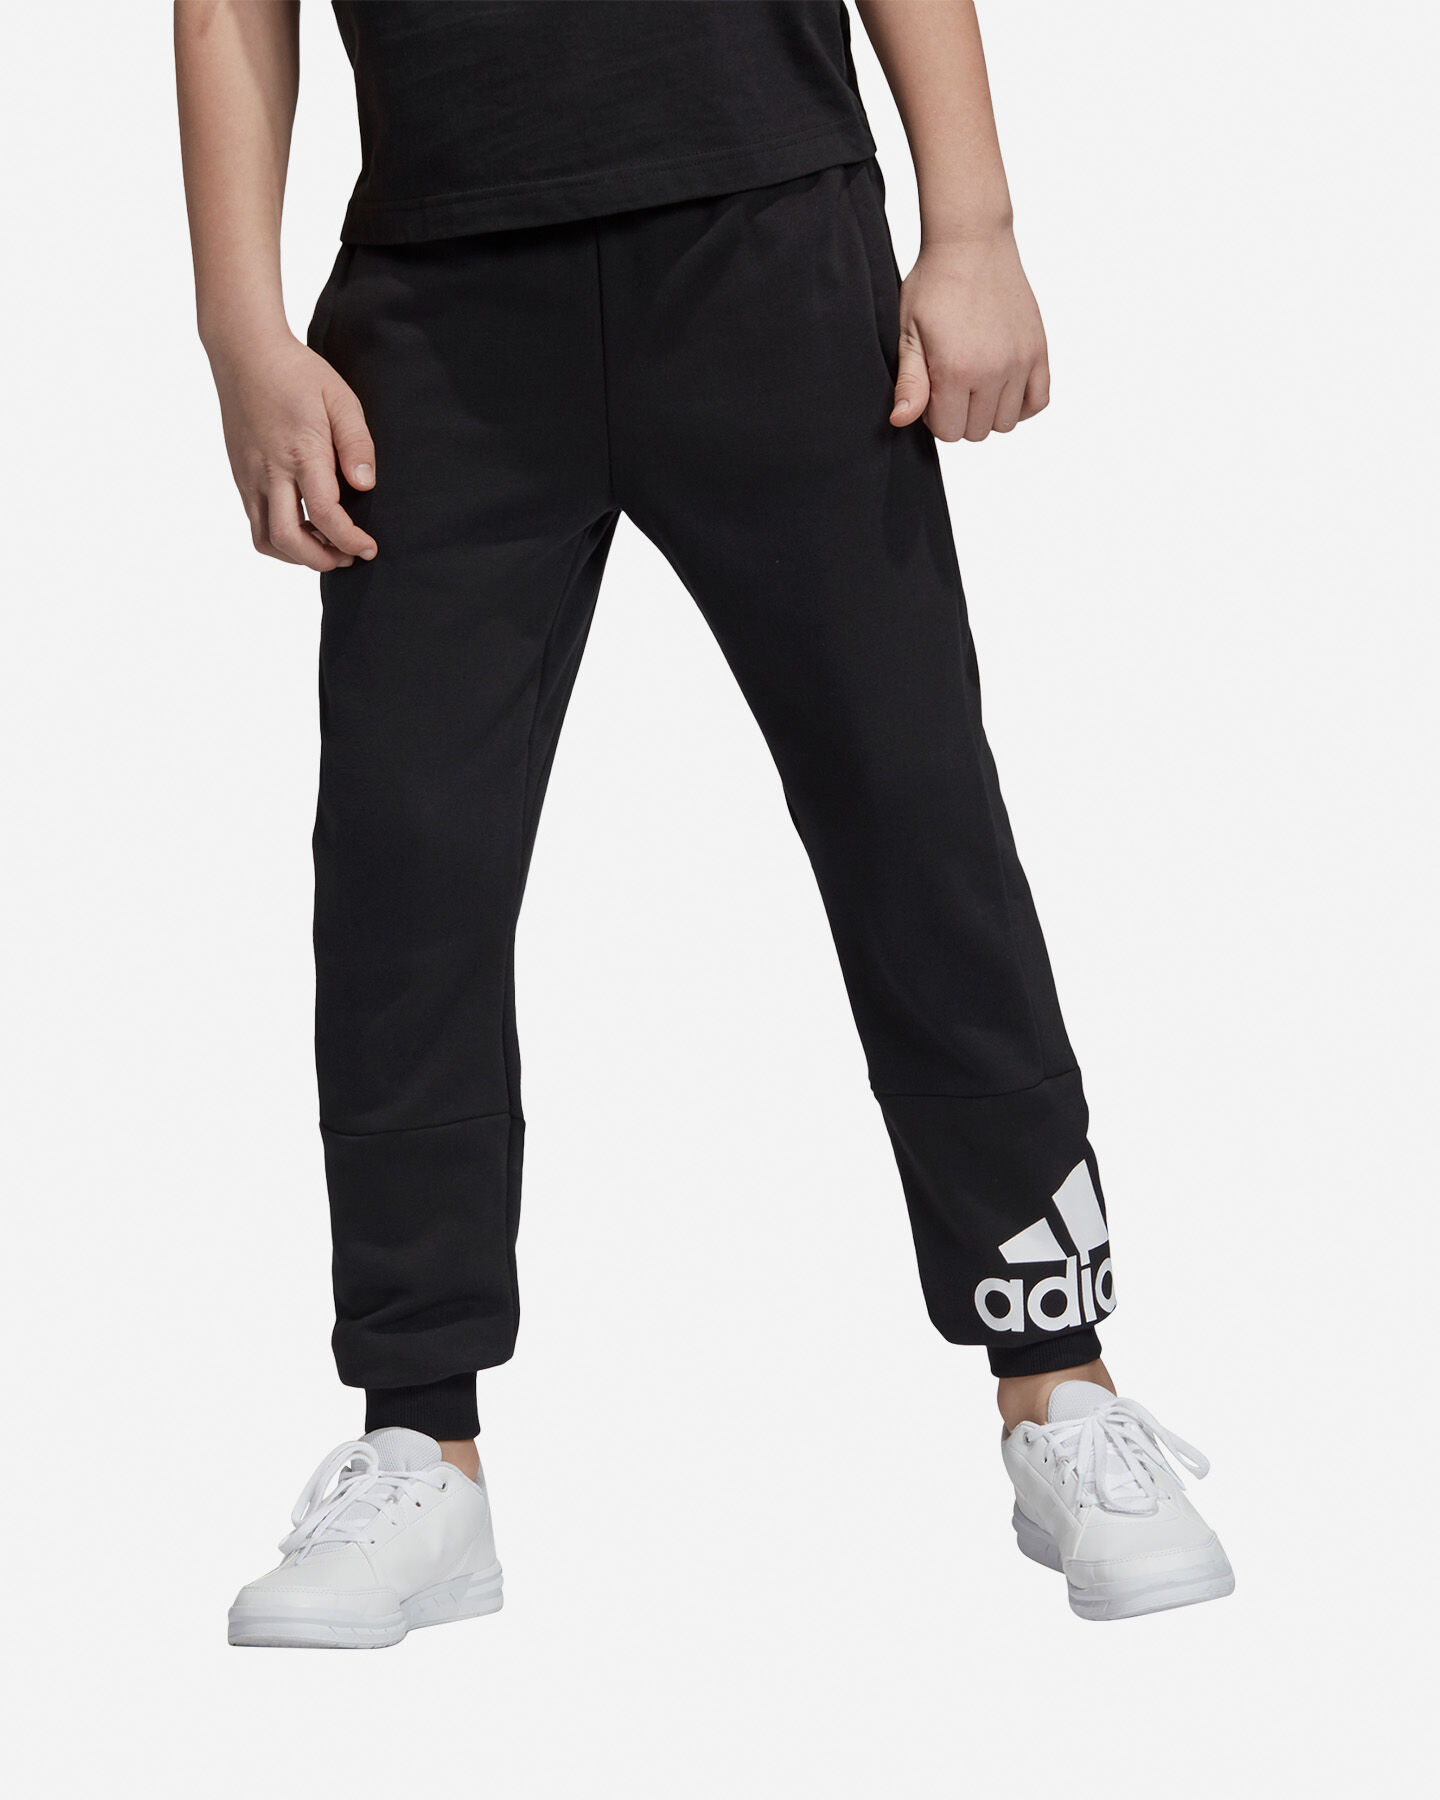  Pantalone ADIDAS MUST HAVES JR S2014745|UNI|7-8A scatto 2